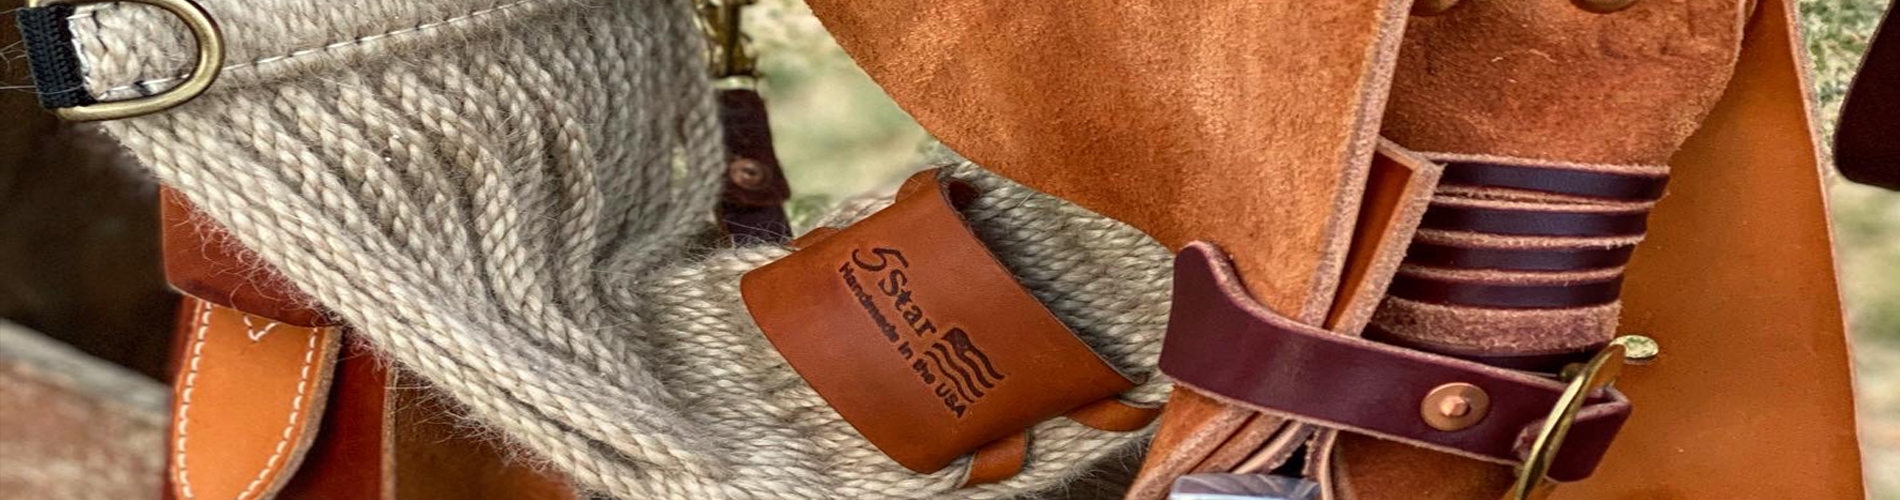 The Y-Cinch - Woven Roper - Natural  5 Star Equine, manufacturer of the  world's finest, all-natural saddle pads and mohair cinches